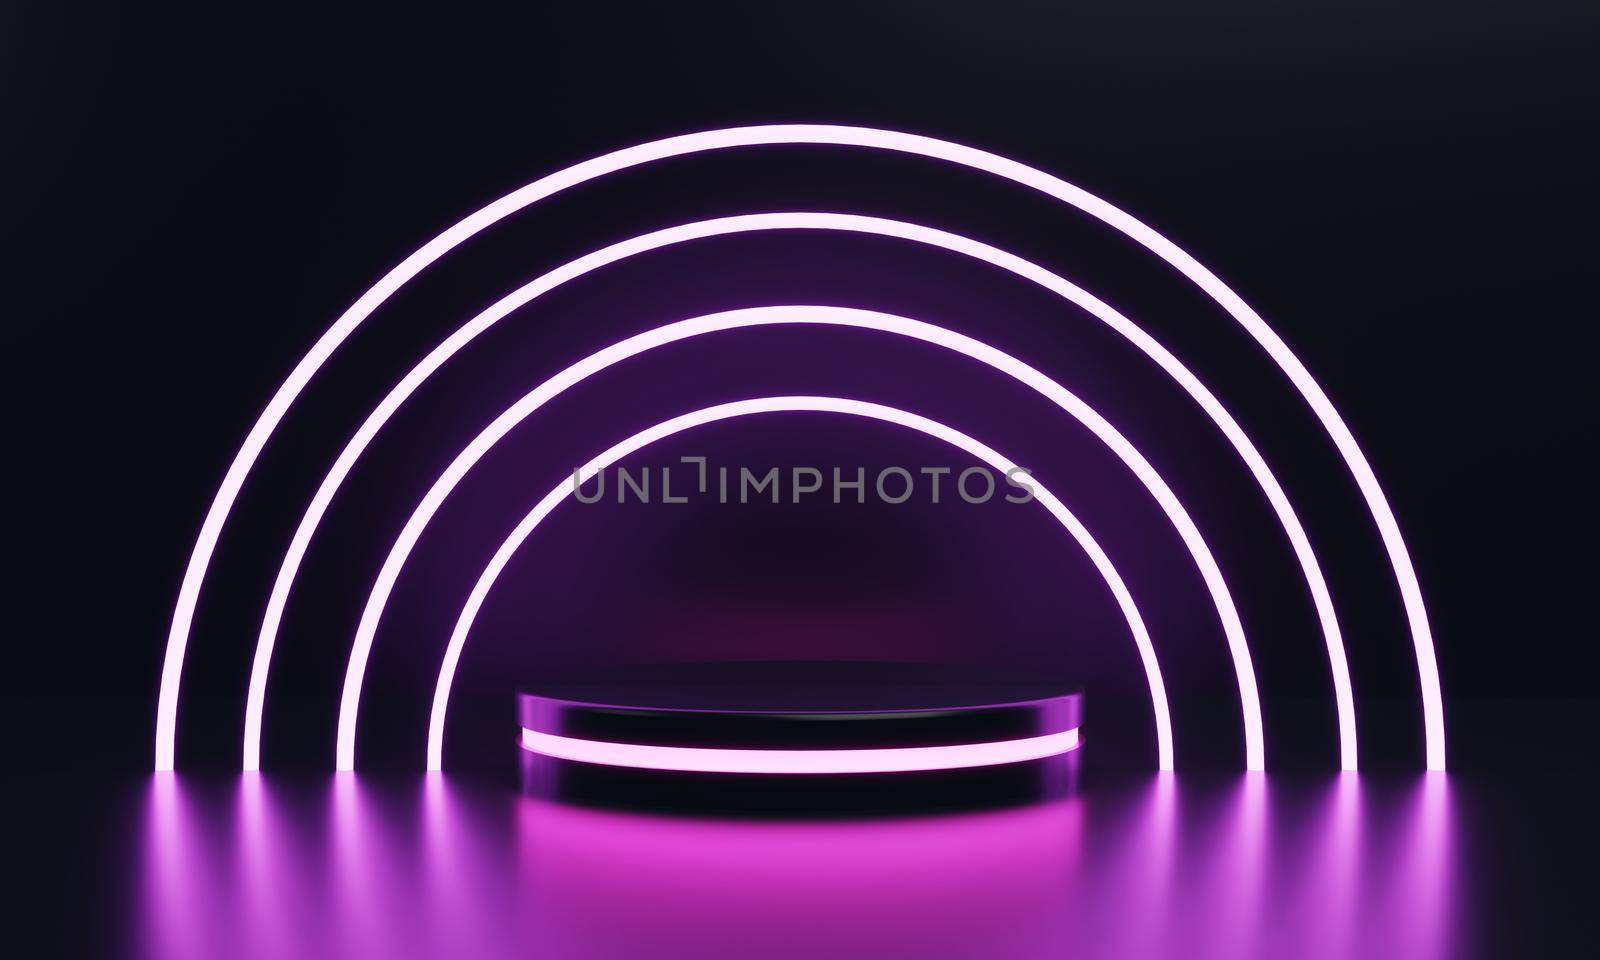 Modern round product showcase sci-fi podium with pink glowing light neon ring frame background. Technology and object concept. 3D illustration rendering